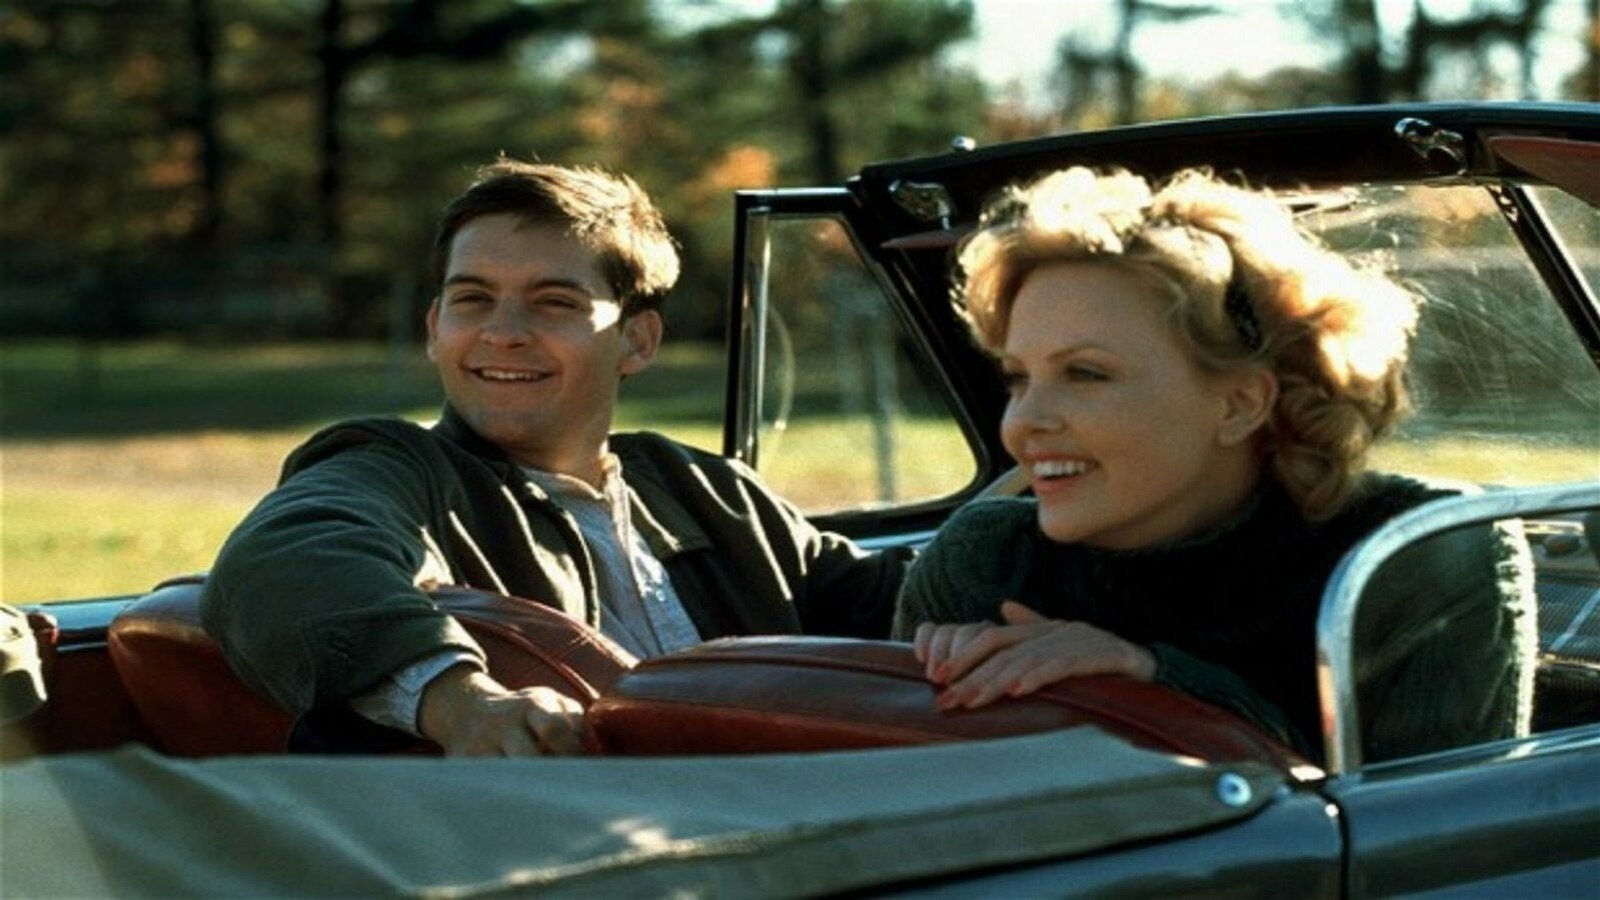 Charlize Theron And Tobey Maguire Had Some Issues On The Set Of The Cider House Rules - /Film